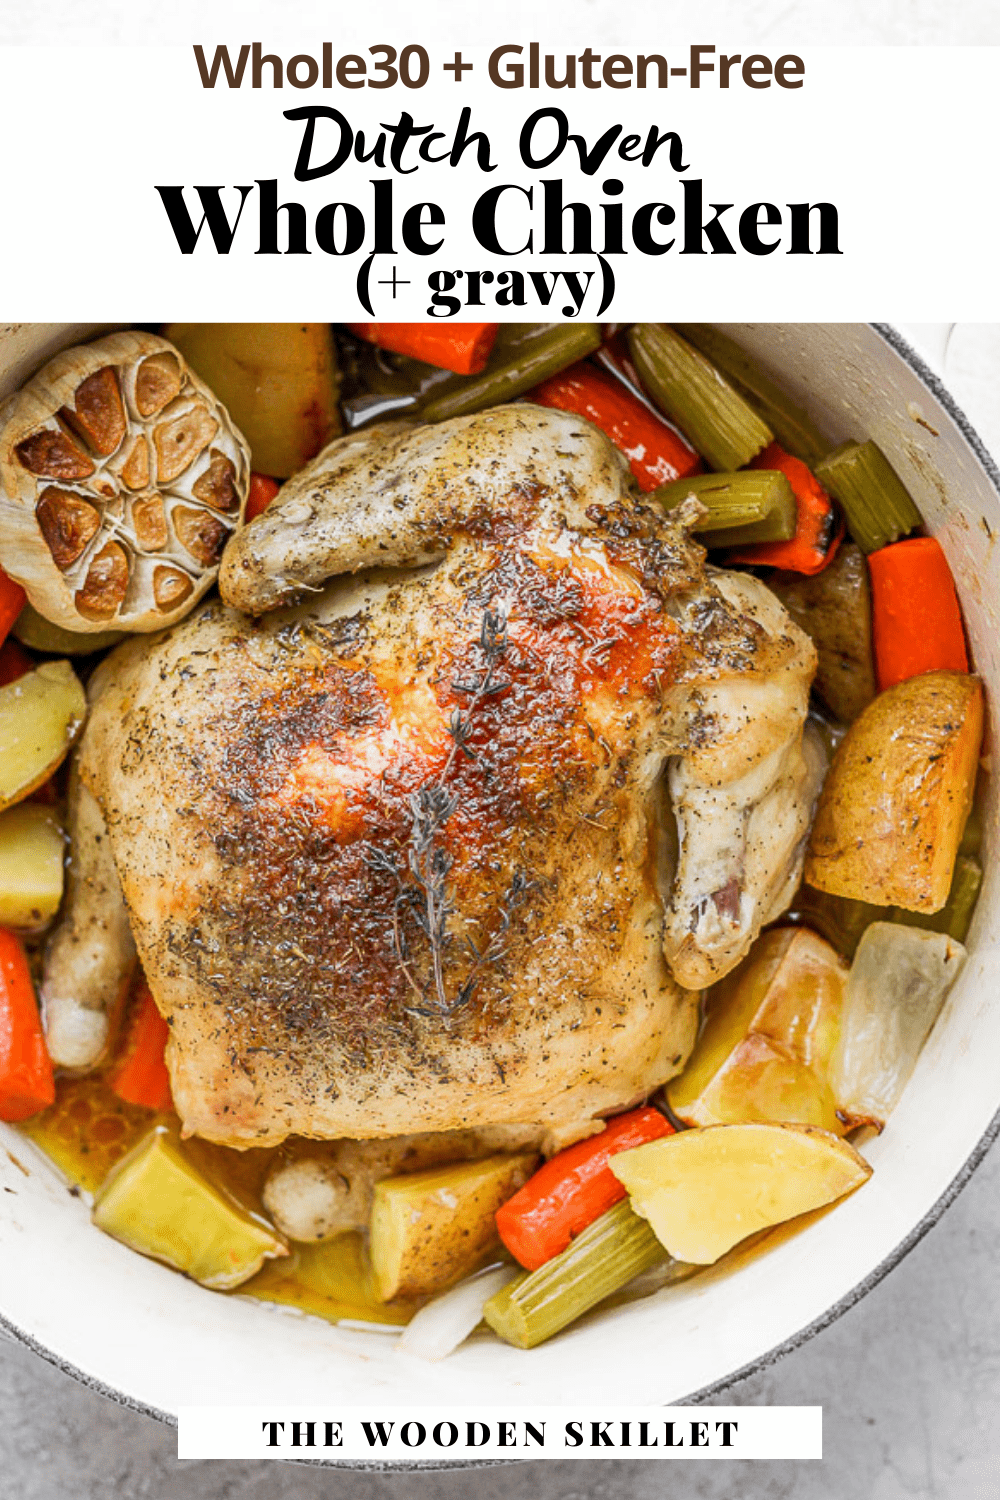 Dutch Oven Whole Chicken - The Wooden Skillet